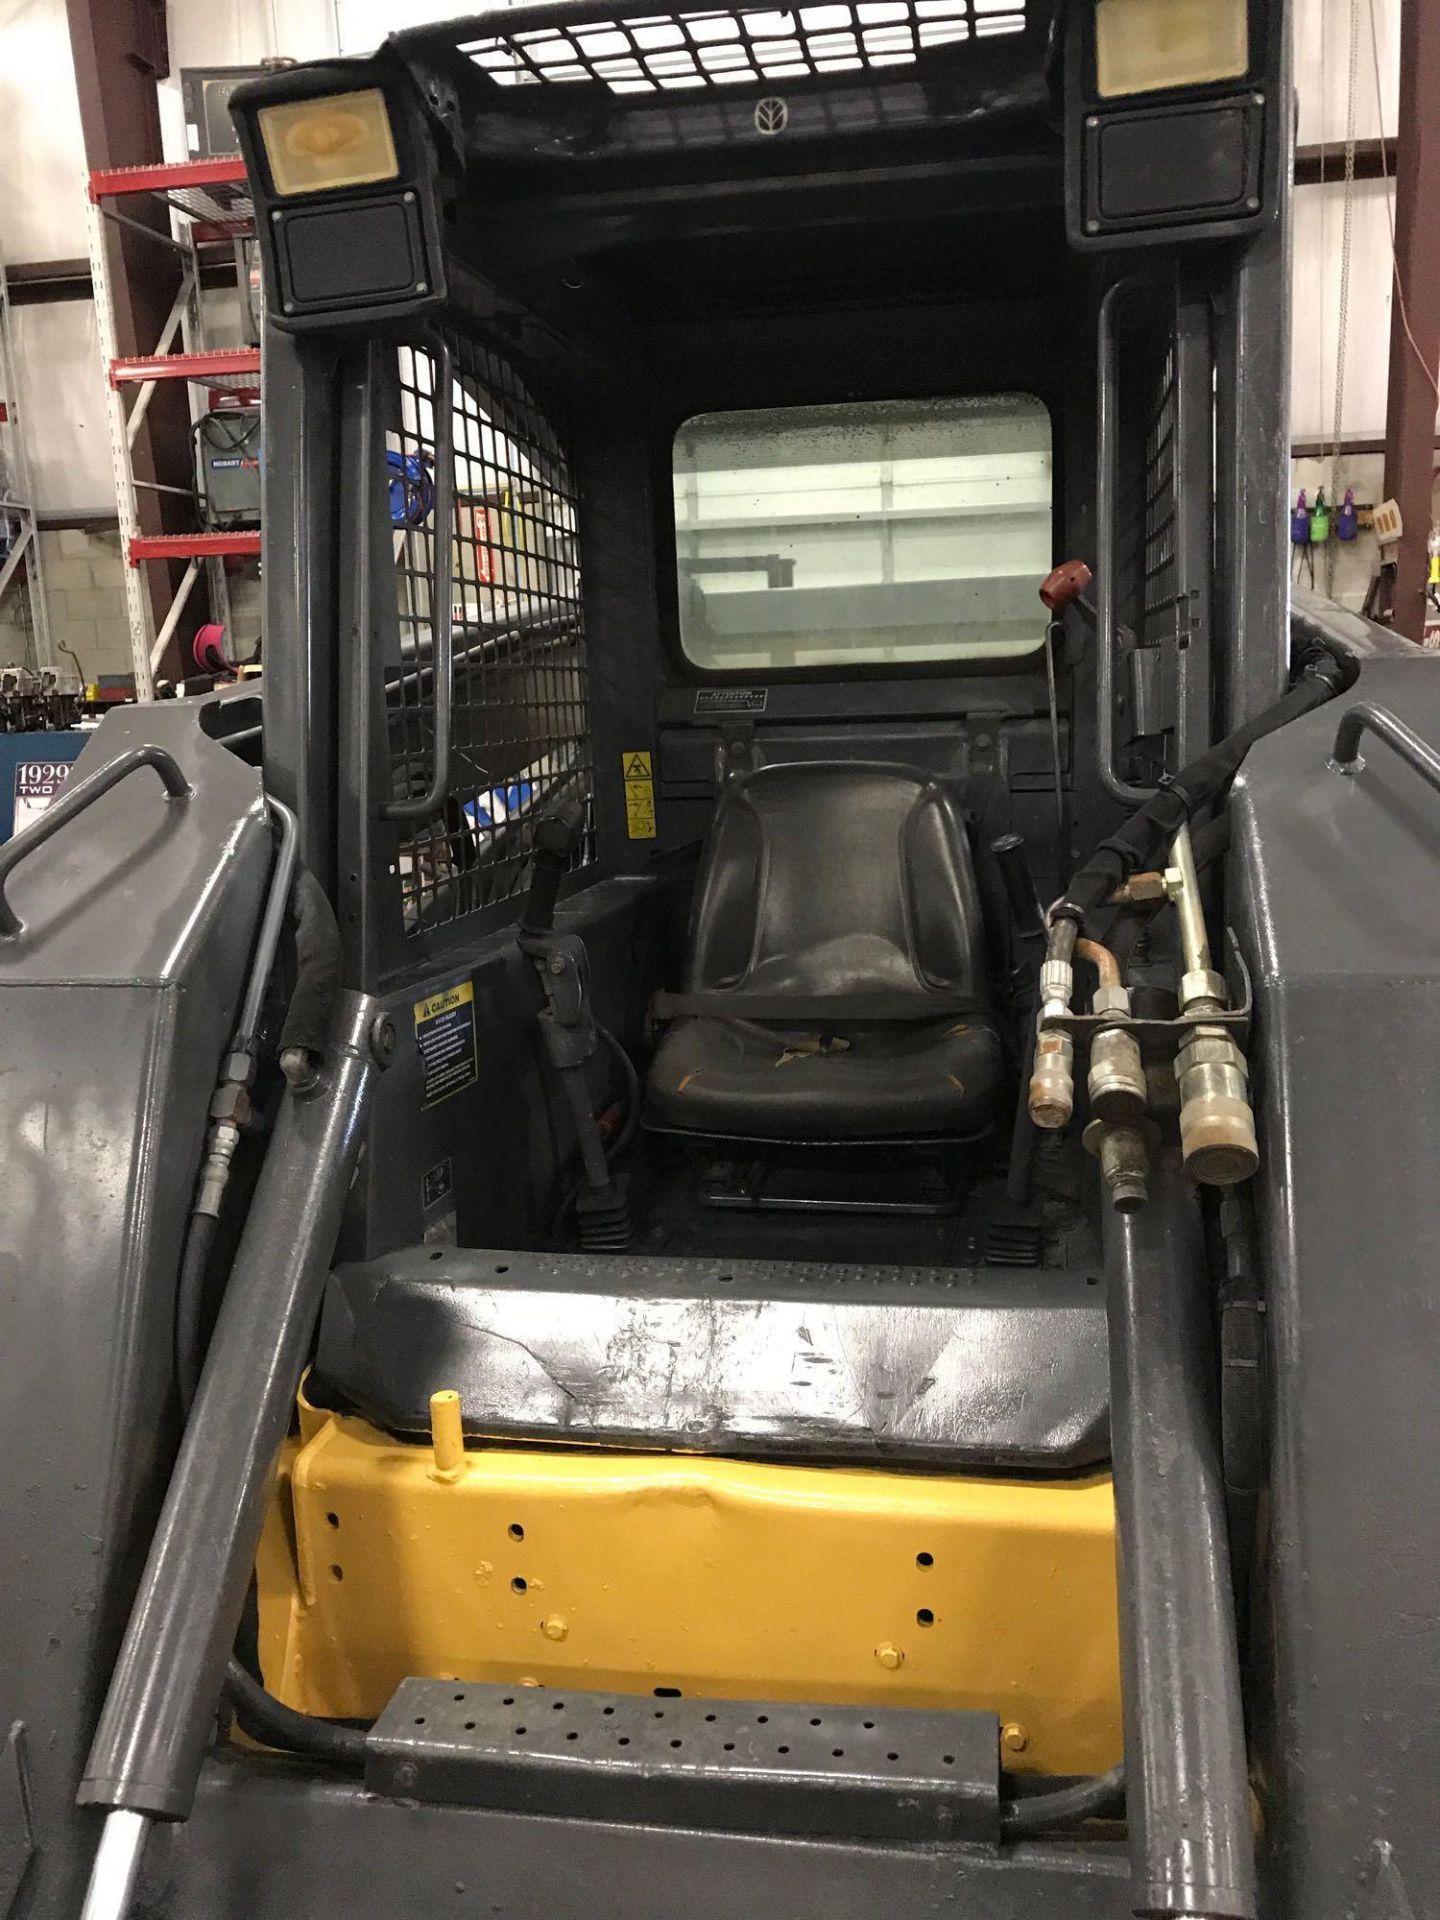 2006 NEW HOLLAND LS190 SKID STEER, DIESEL, QUICK COUPLER, AUX. HIGH FLOW HYDRAULICS - Image 6 of 7